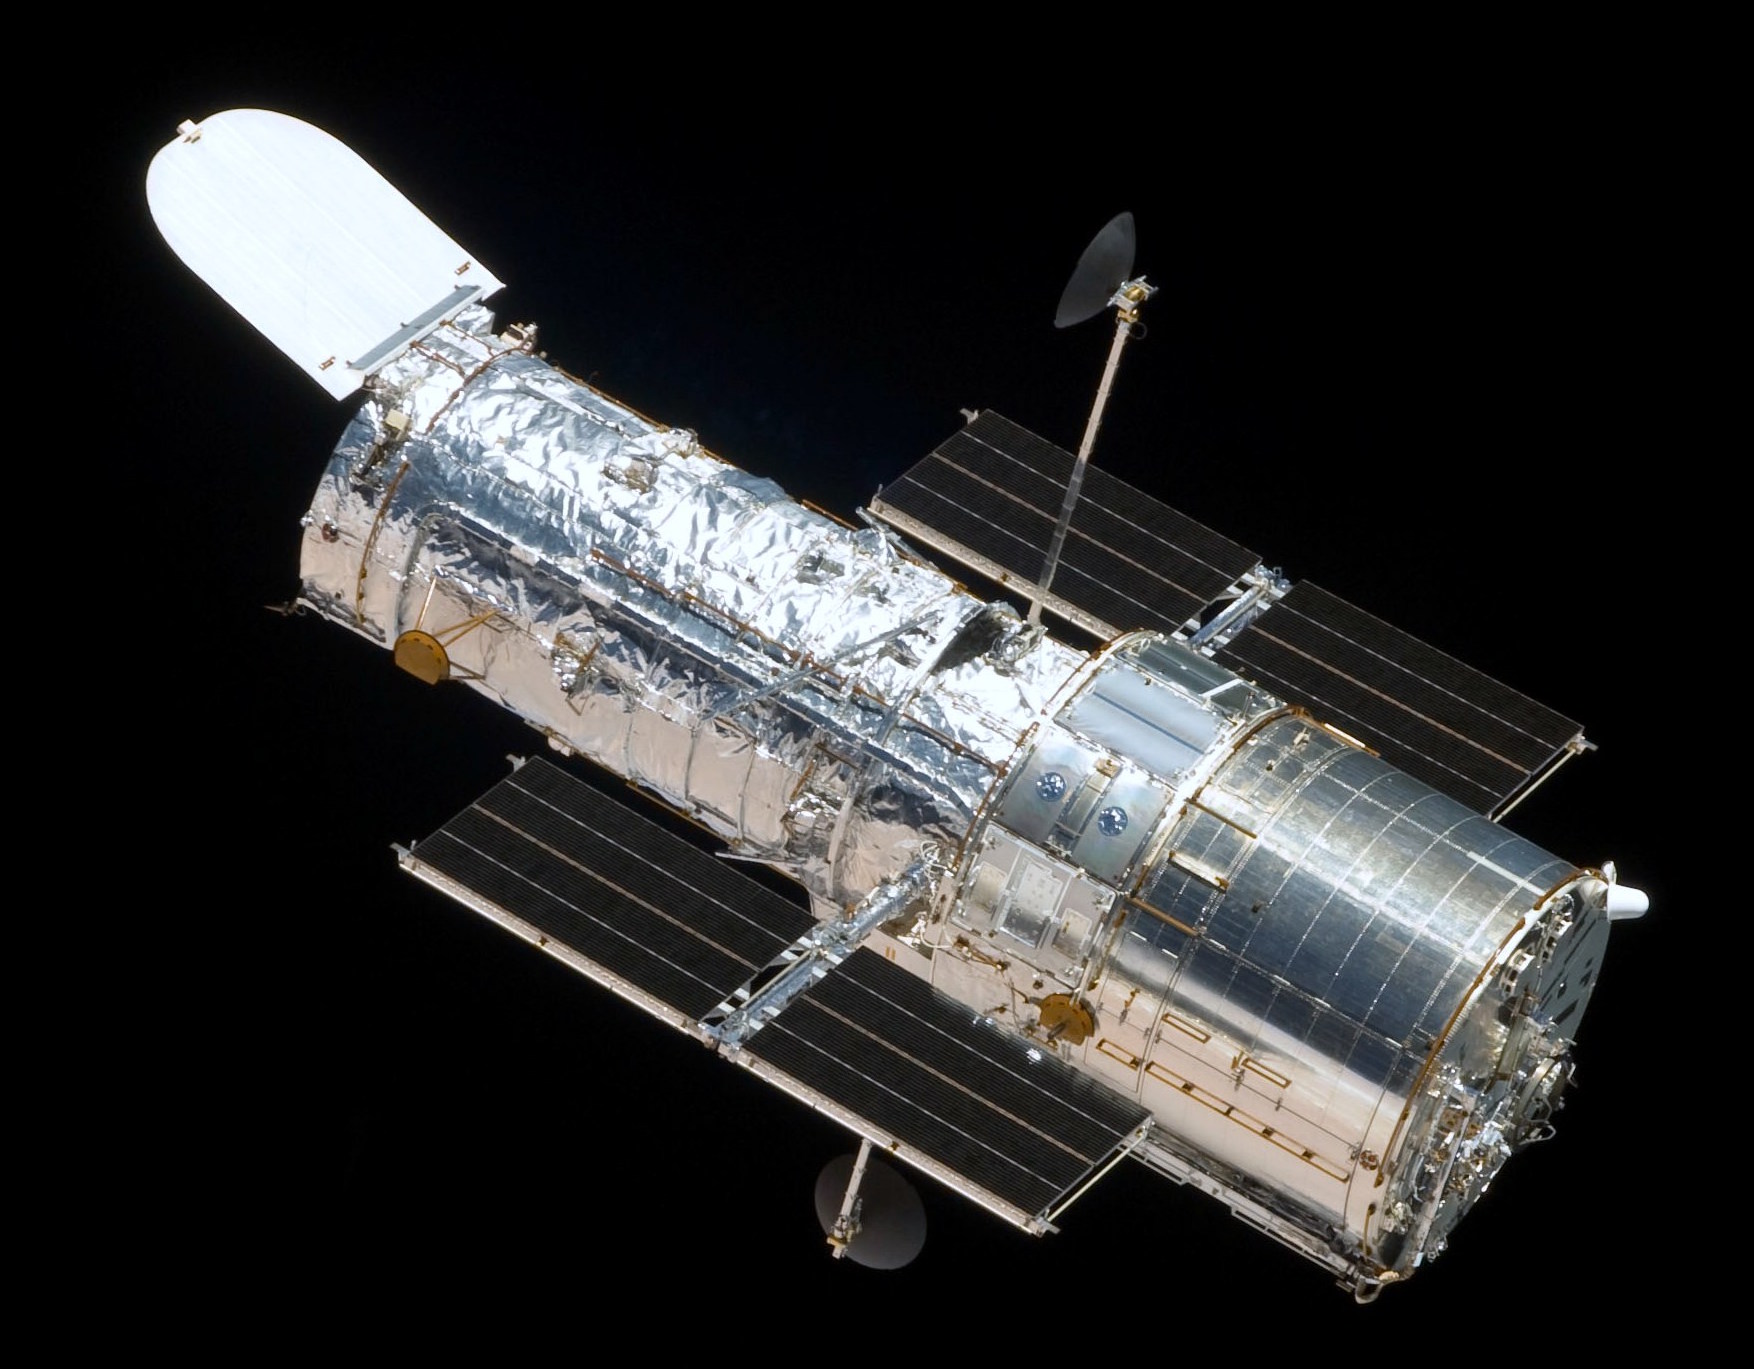 Photograph of the silver Hubble Space Telescope on a black background.